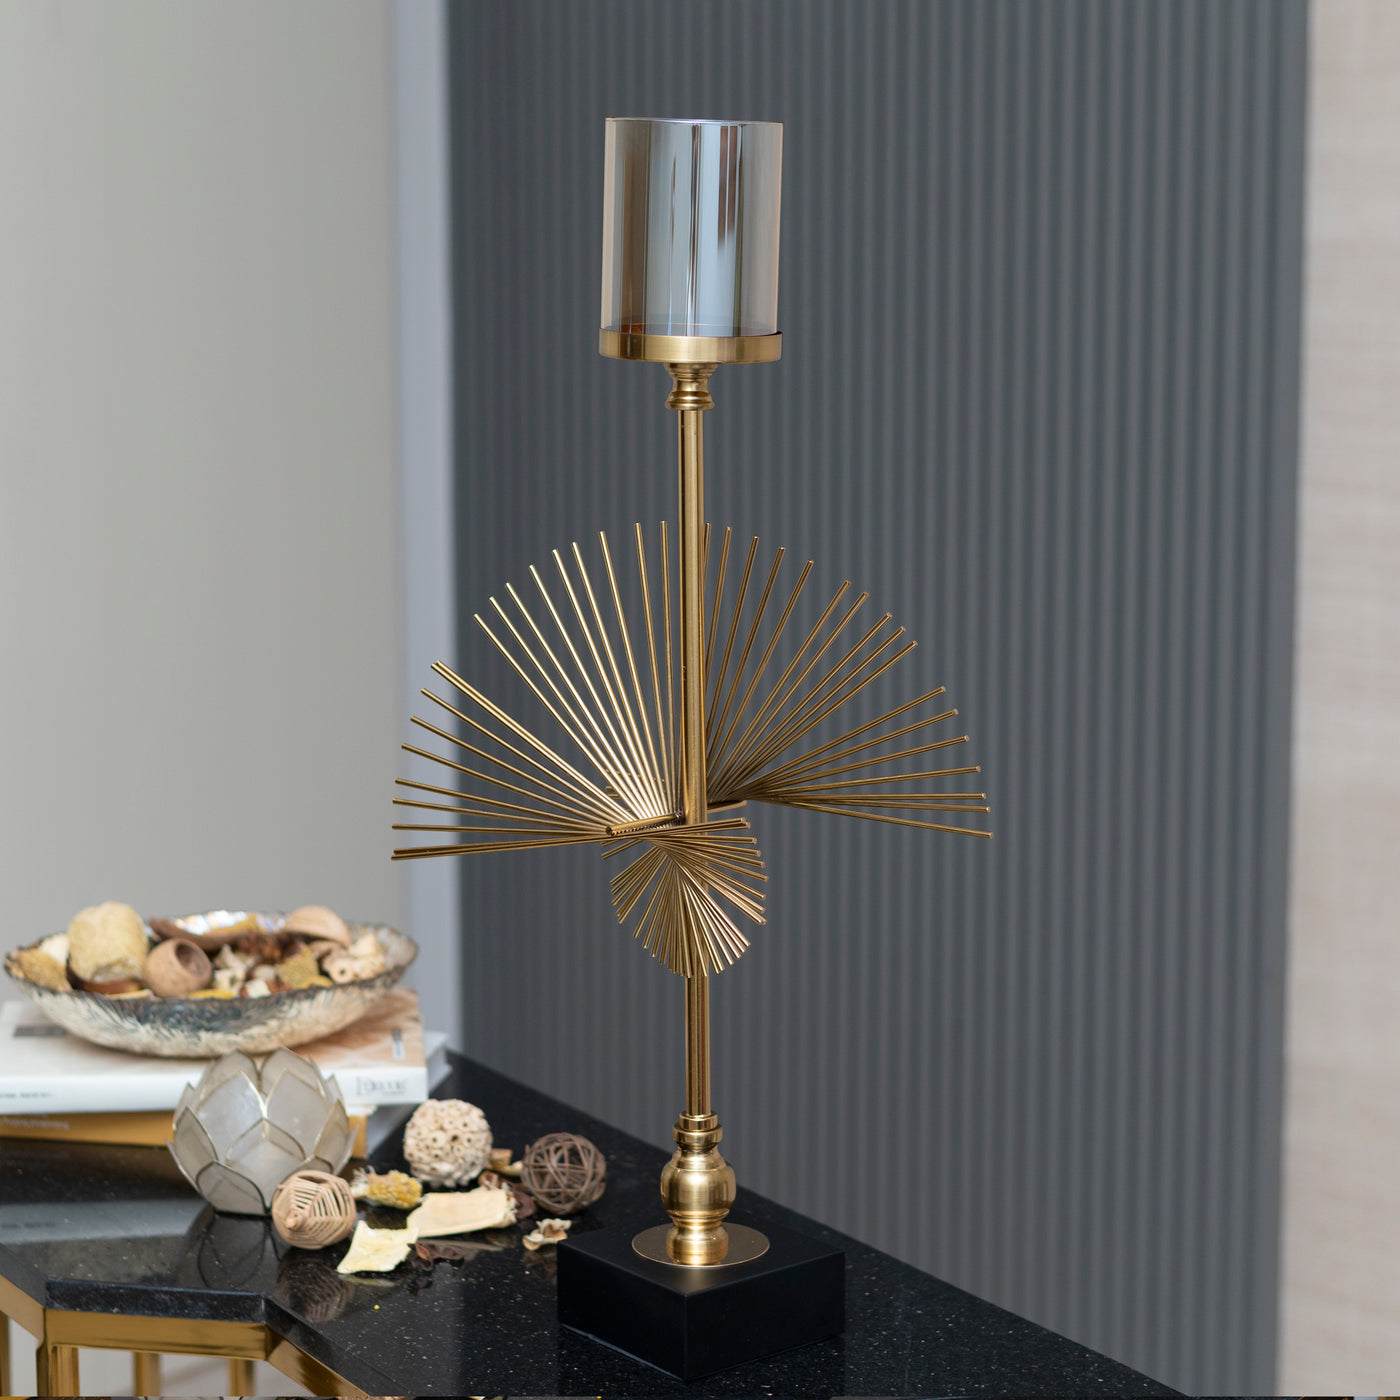 Gold decorative candle stand by Home 360